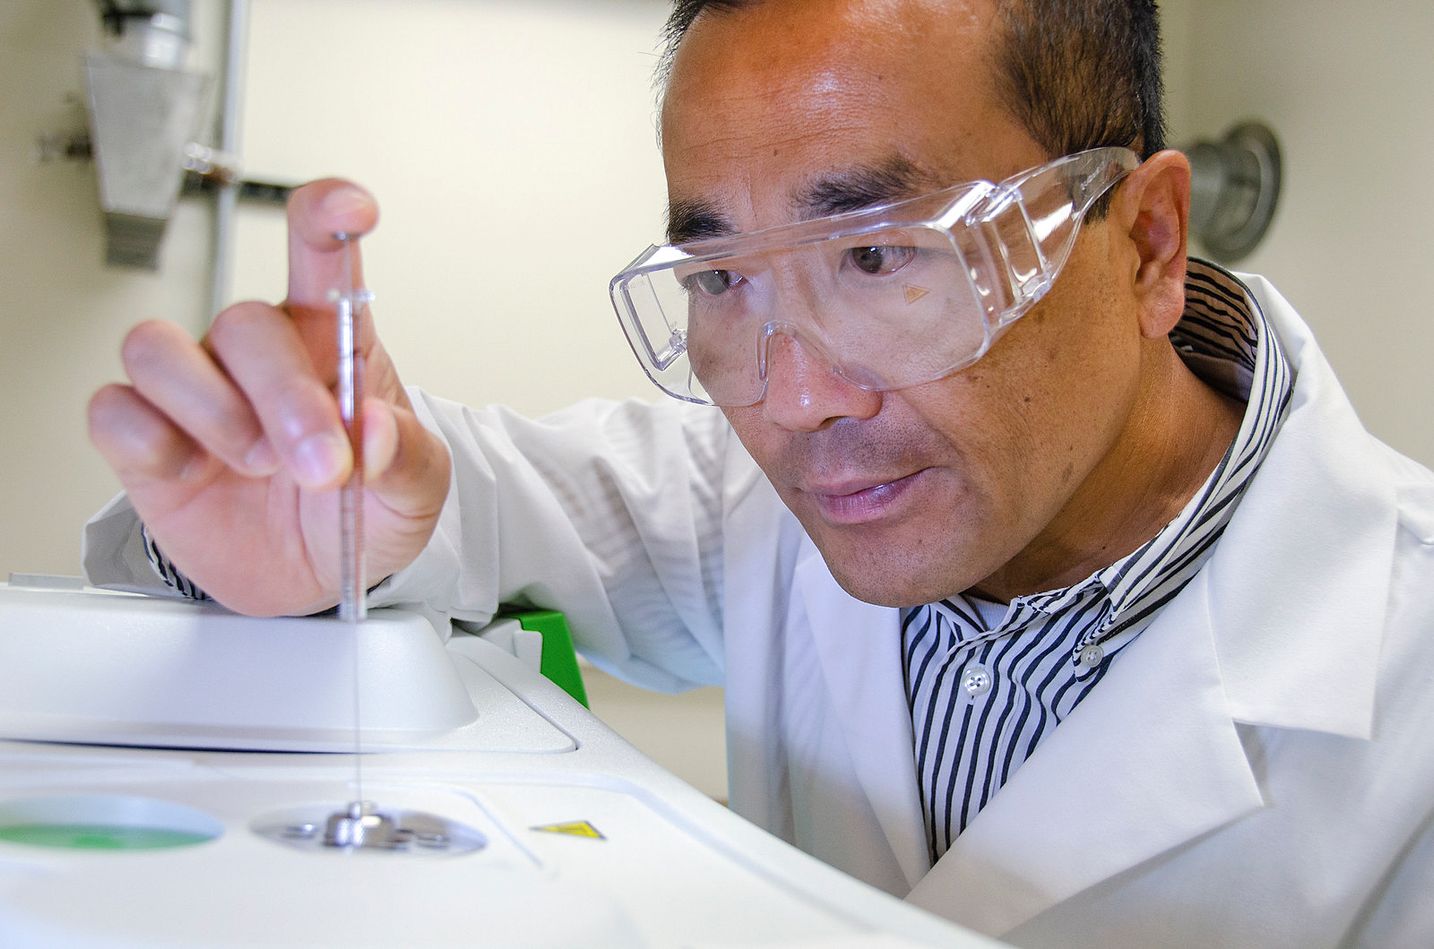 John Hu works in a laboratory wearing a lab coat and protective goggles.